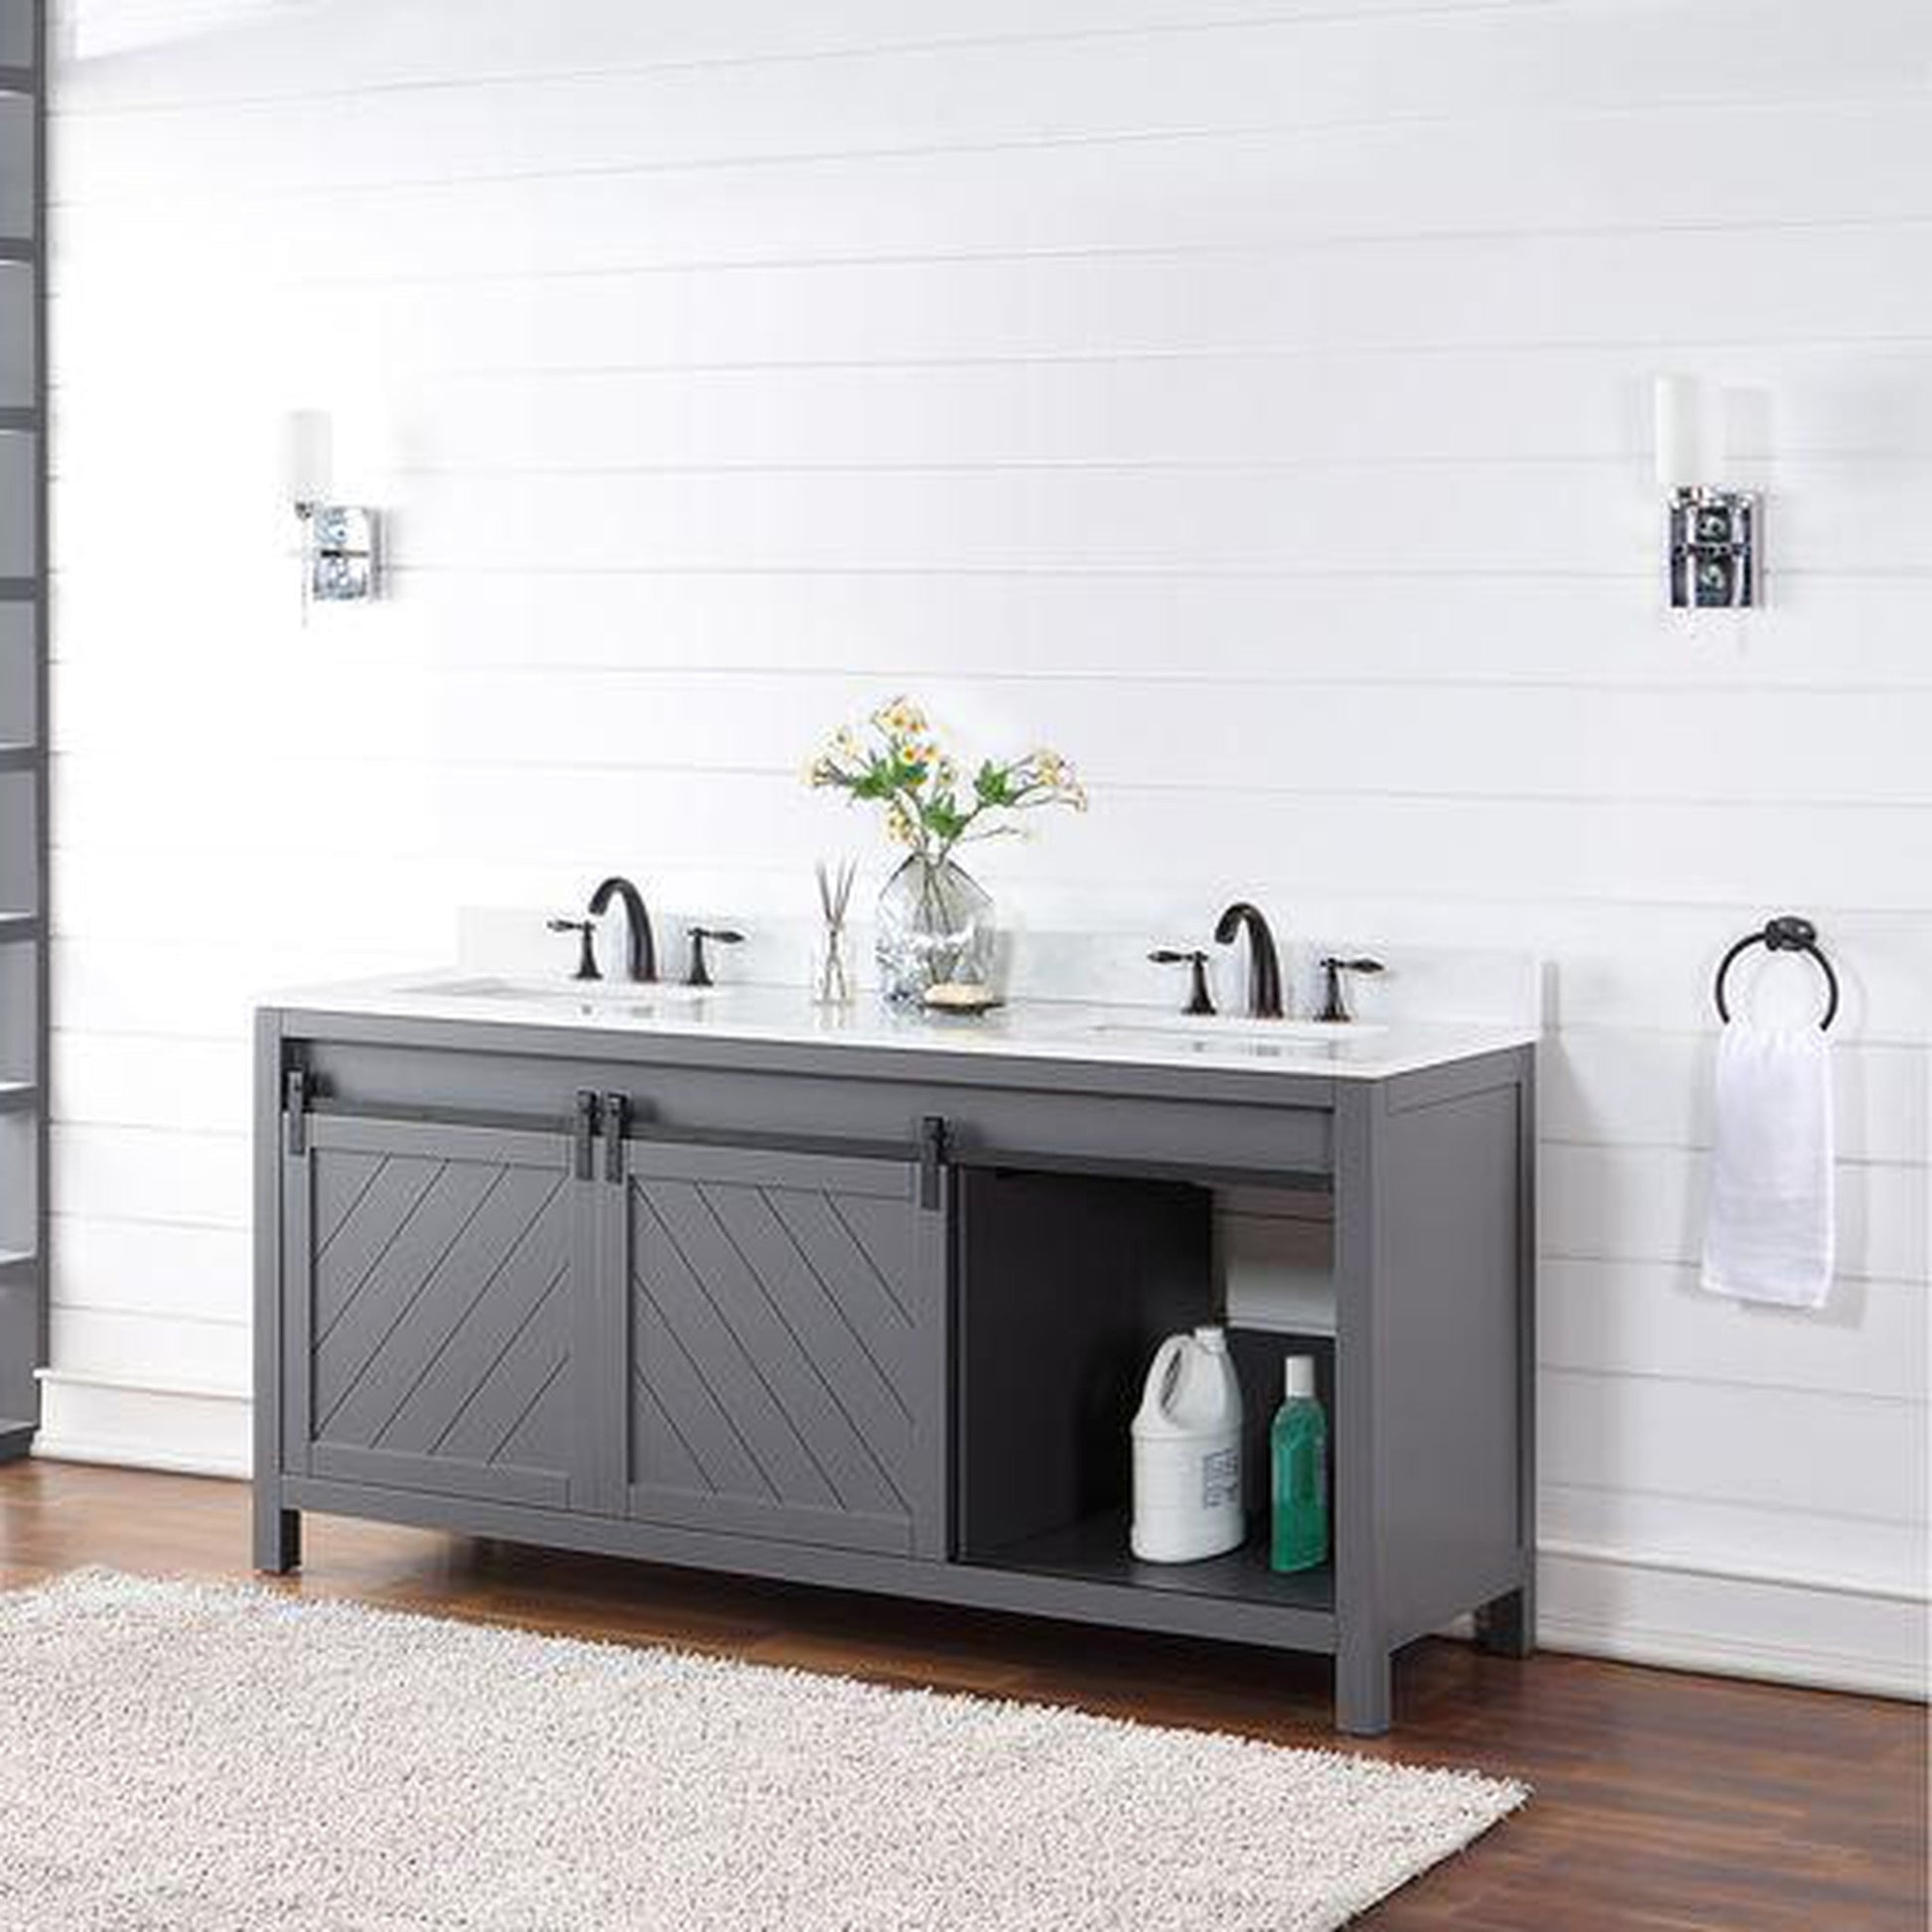 Altair Kinsley 72" Double Gray Freestanding Bathroom Vanity Set With Aosta White Composite Stone Top, Two Rectangular Undermount Ceramic Sinks, and Overflow